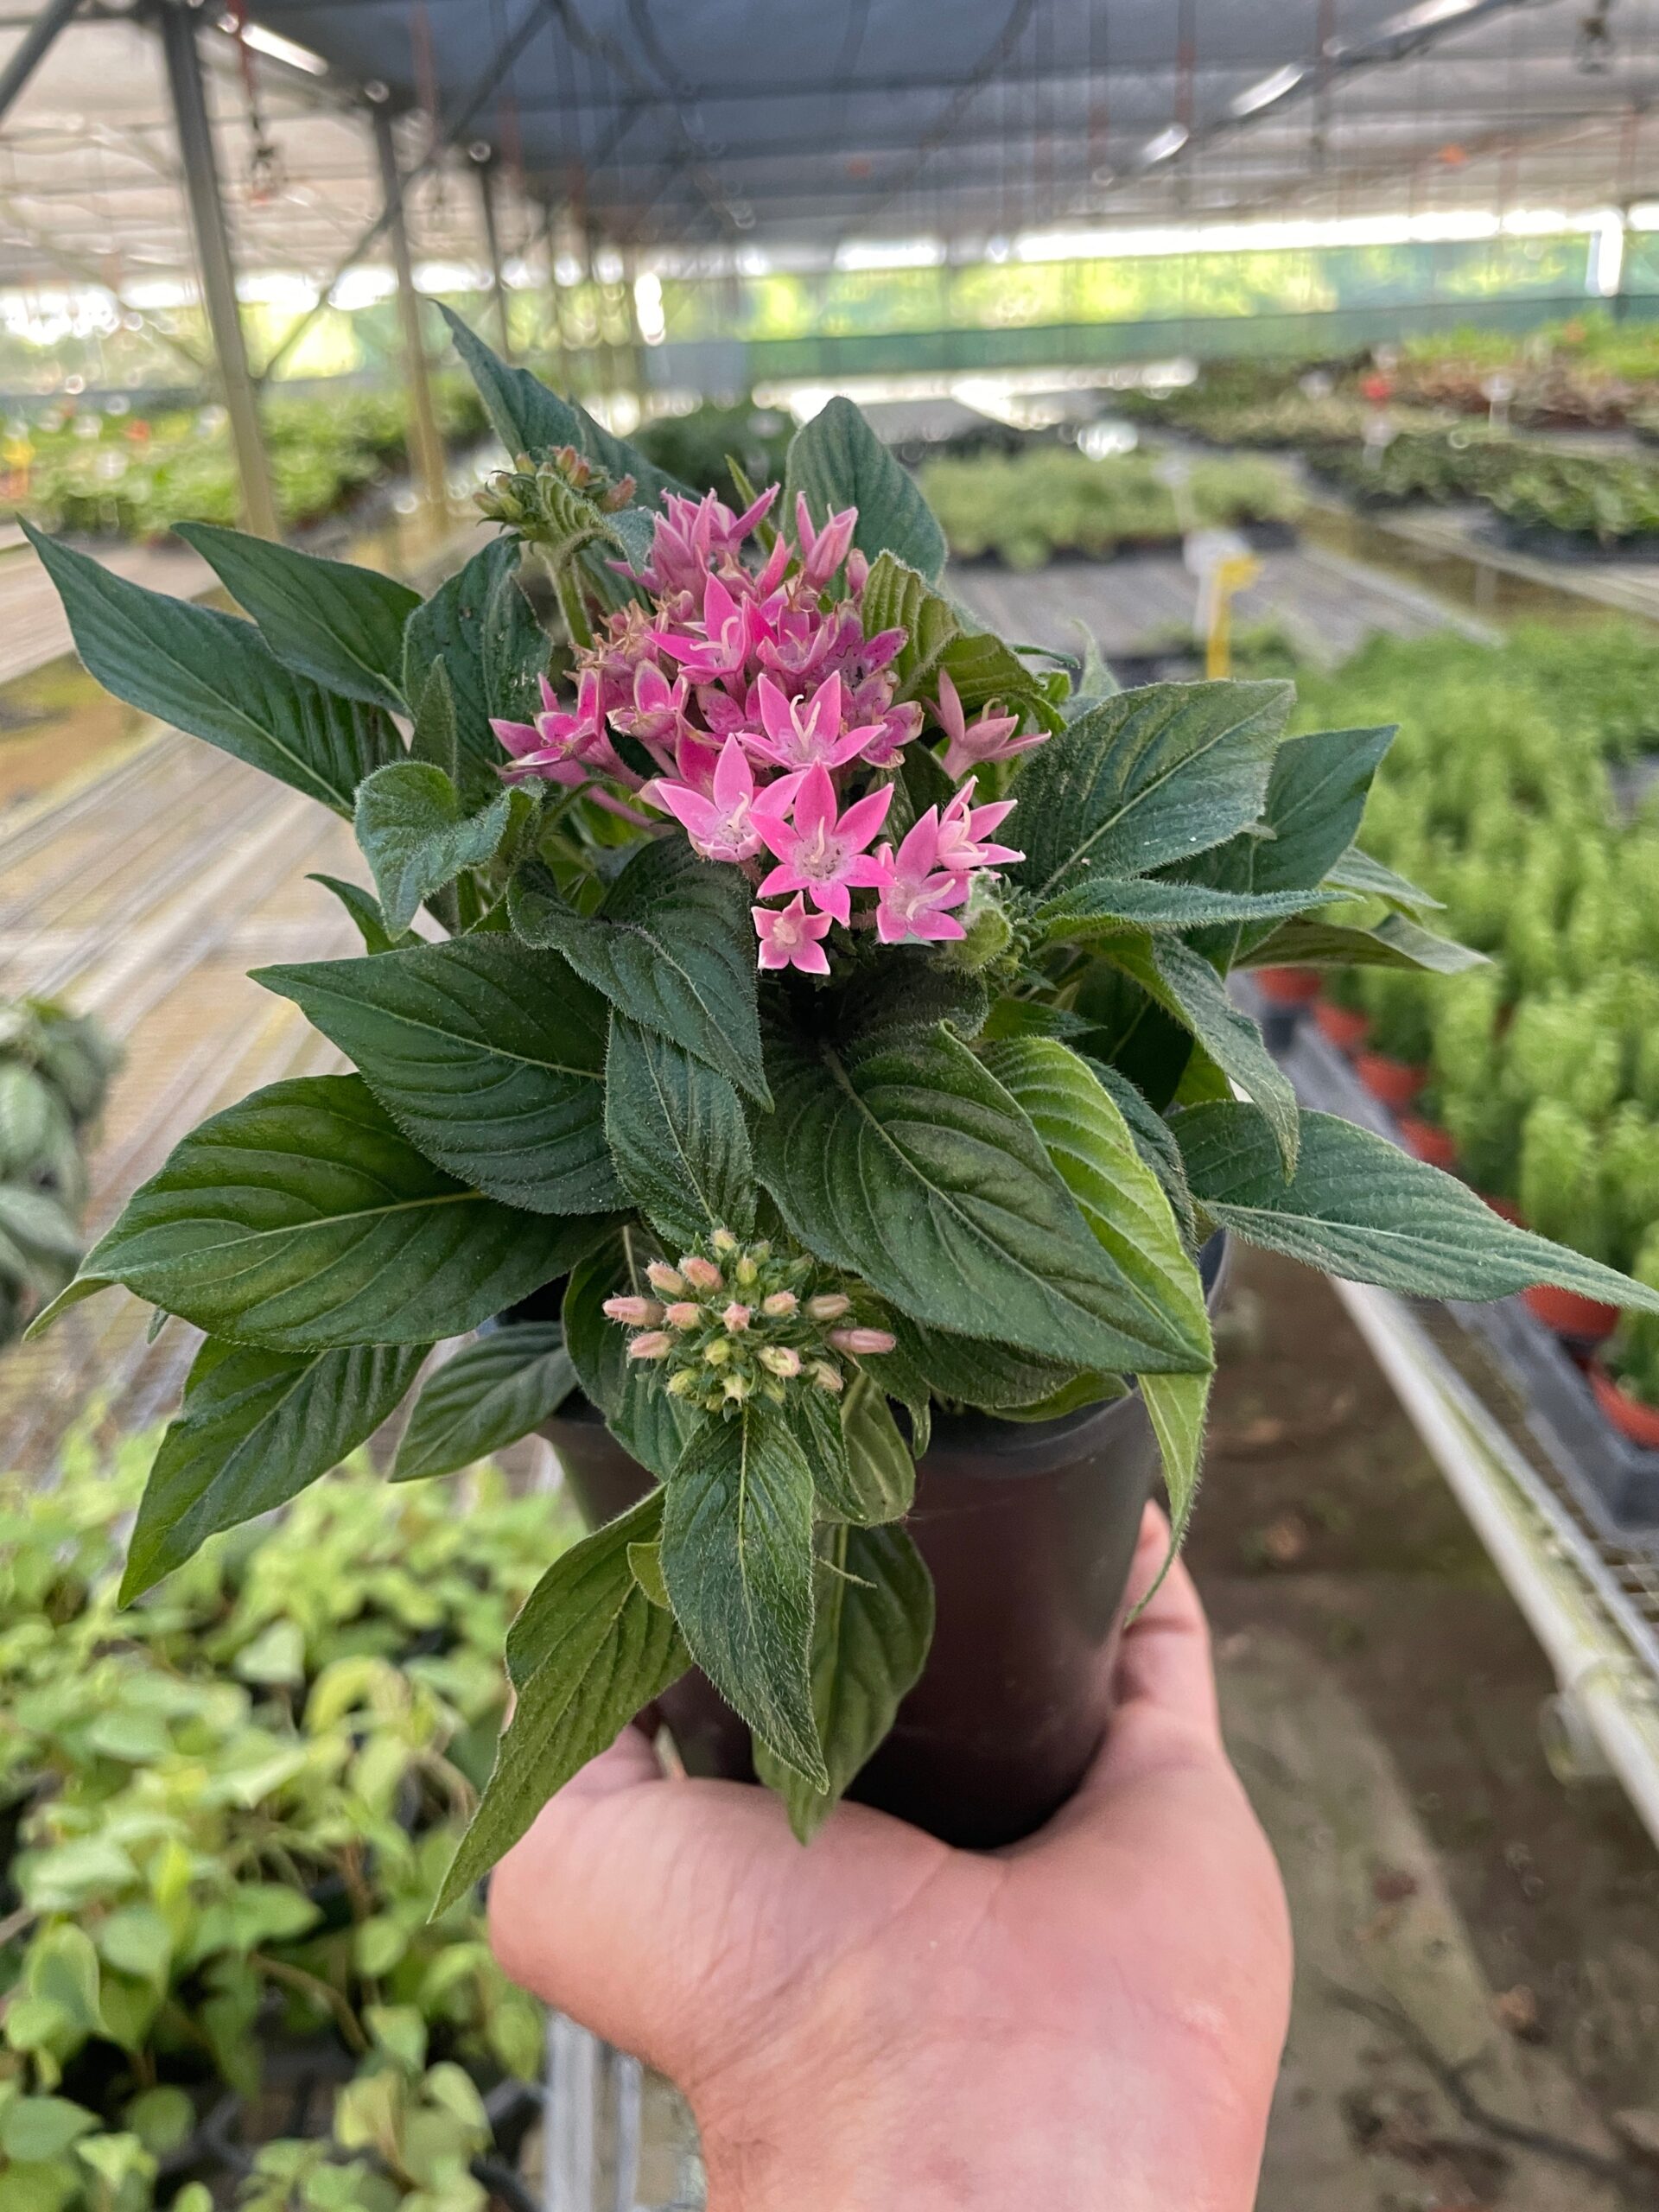 A hand holds a small potted plant with pink flowers and green leaves inside a greenhouse filled with various plants.